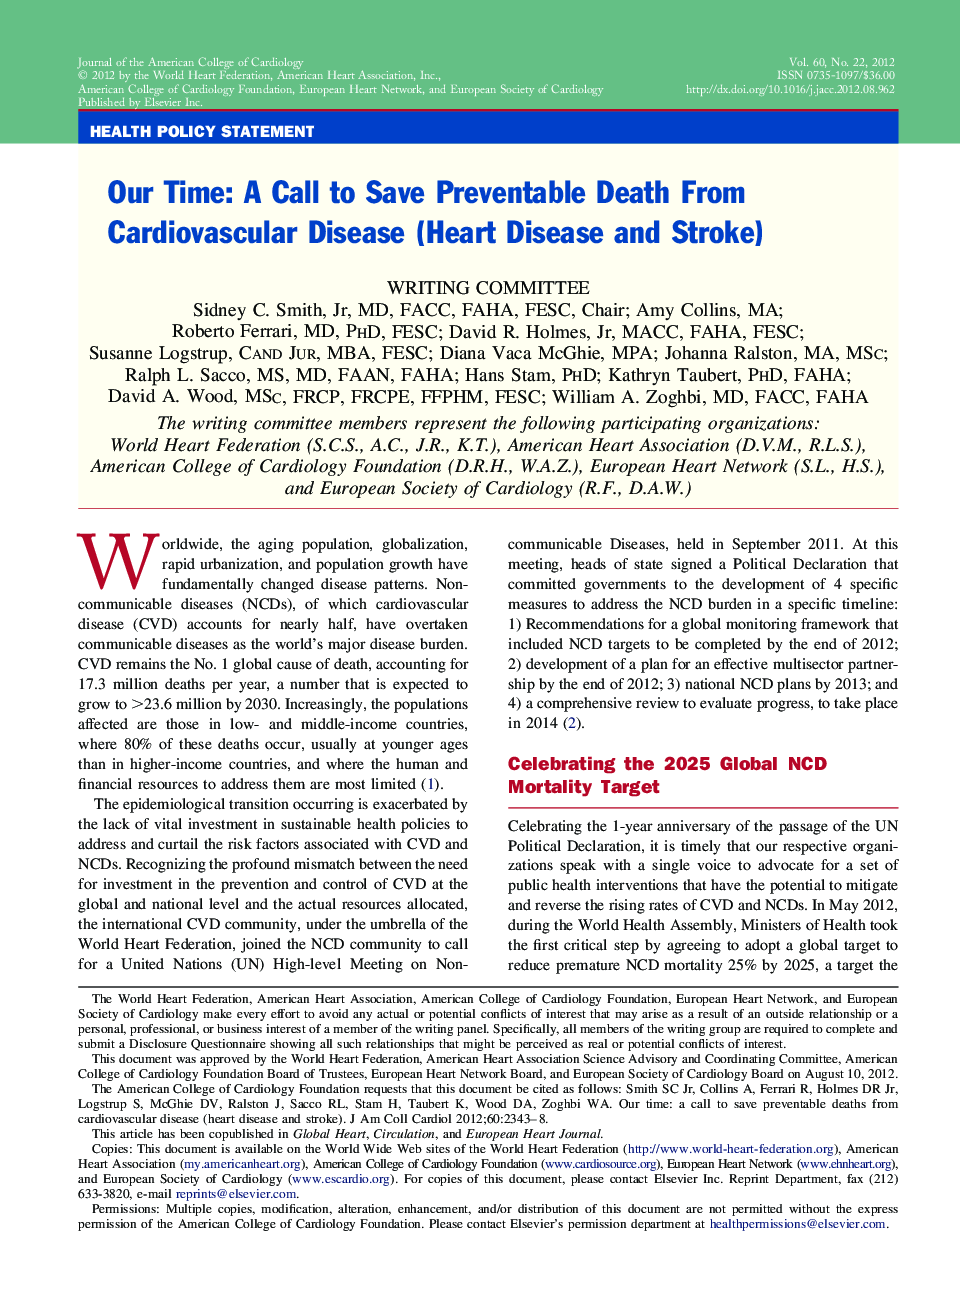 Our Time: A Call to Save Preventable Death From Cardiovascular Disease (Heart Disease and Stroke)